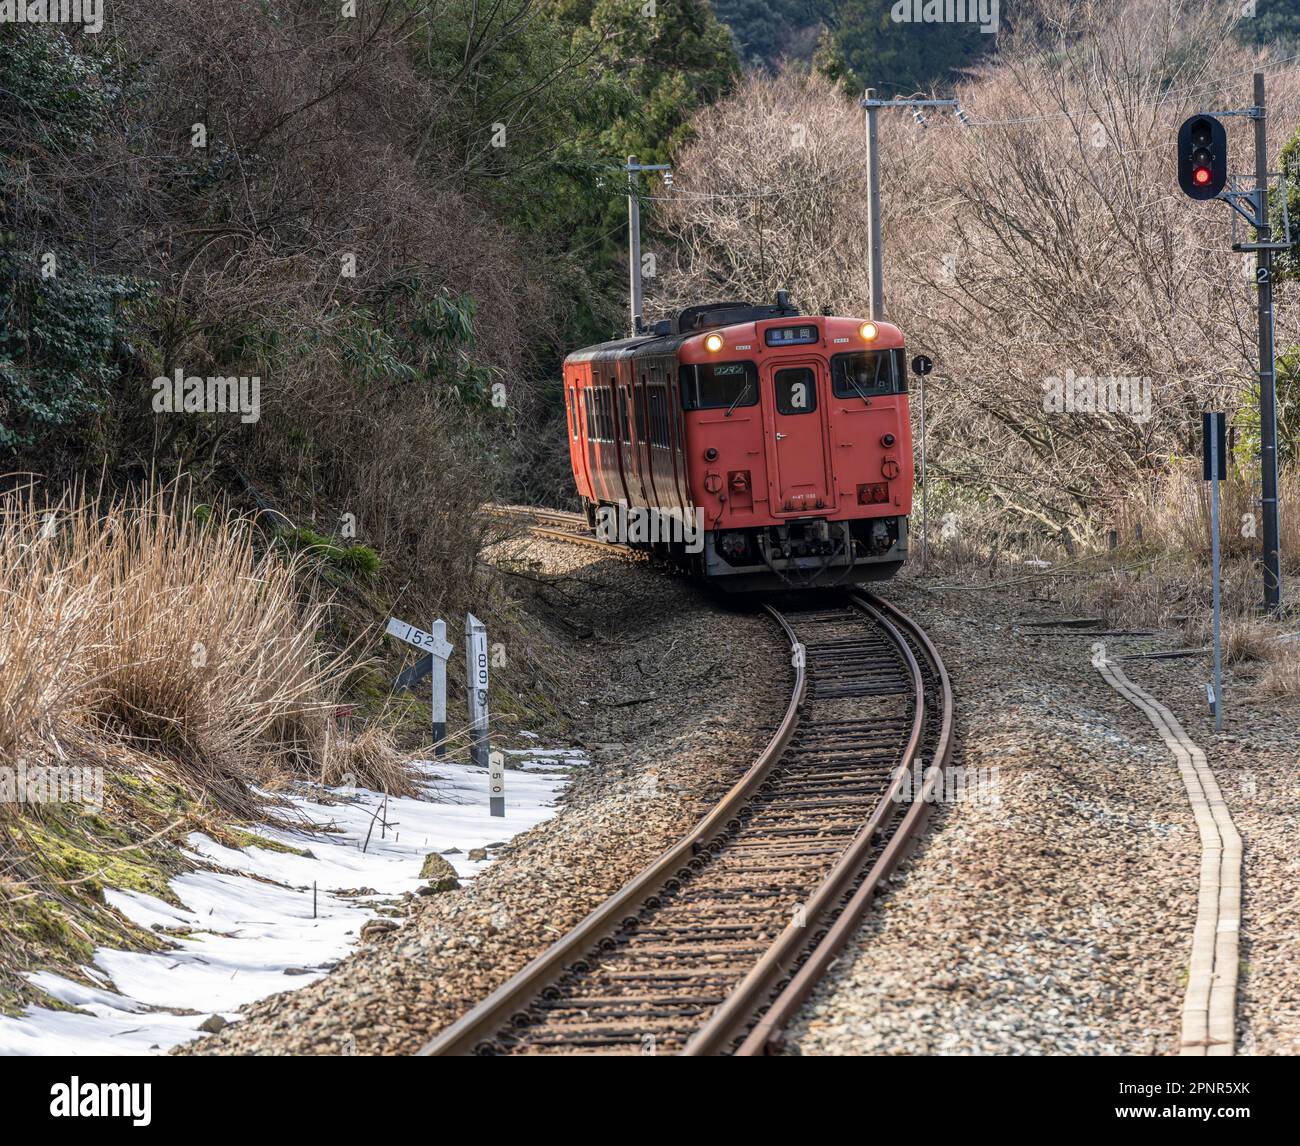 A JR West KiHa 47 Series train approaching Amarube Station on the Sanin Main Line in Hyogo Prefecture, Japan. Stock Photo